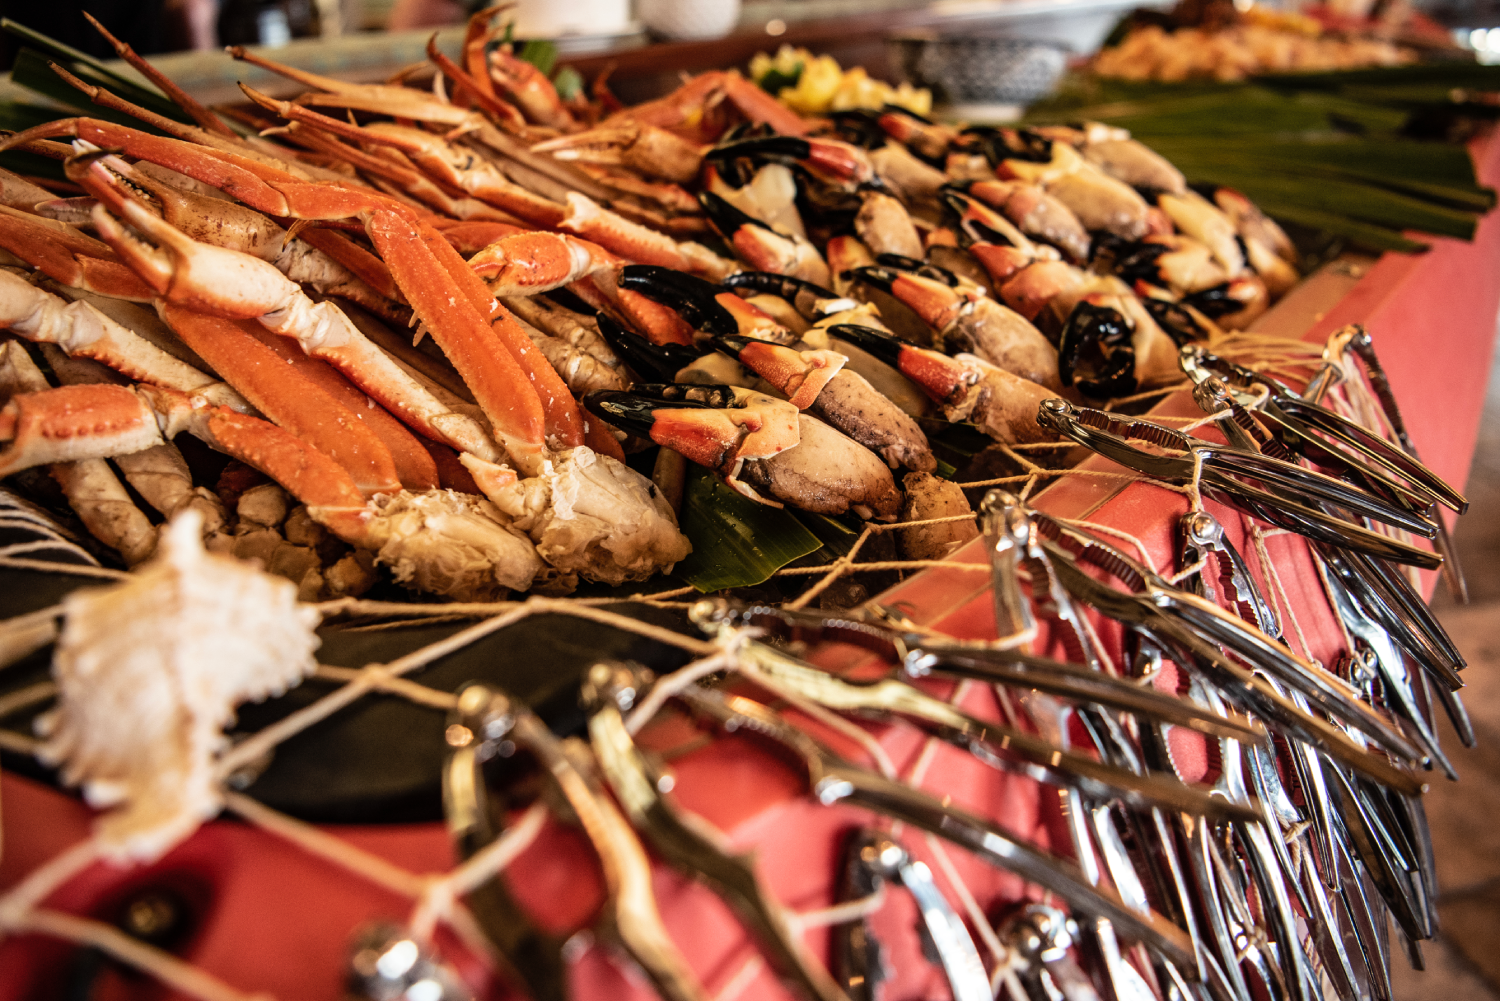 A sumptuous seafood spread representing the club lifestyle at The Abaco Club